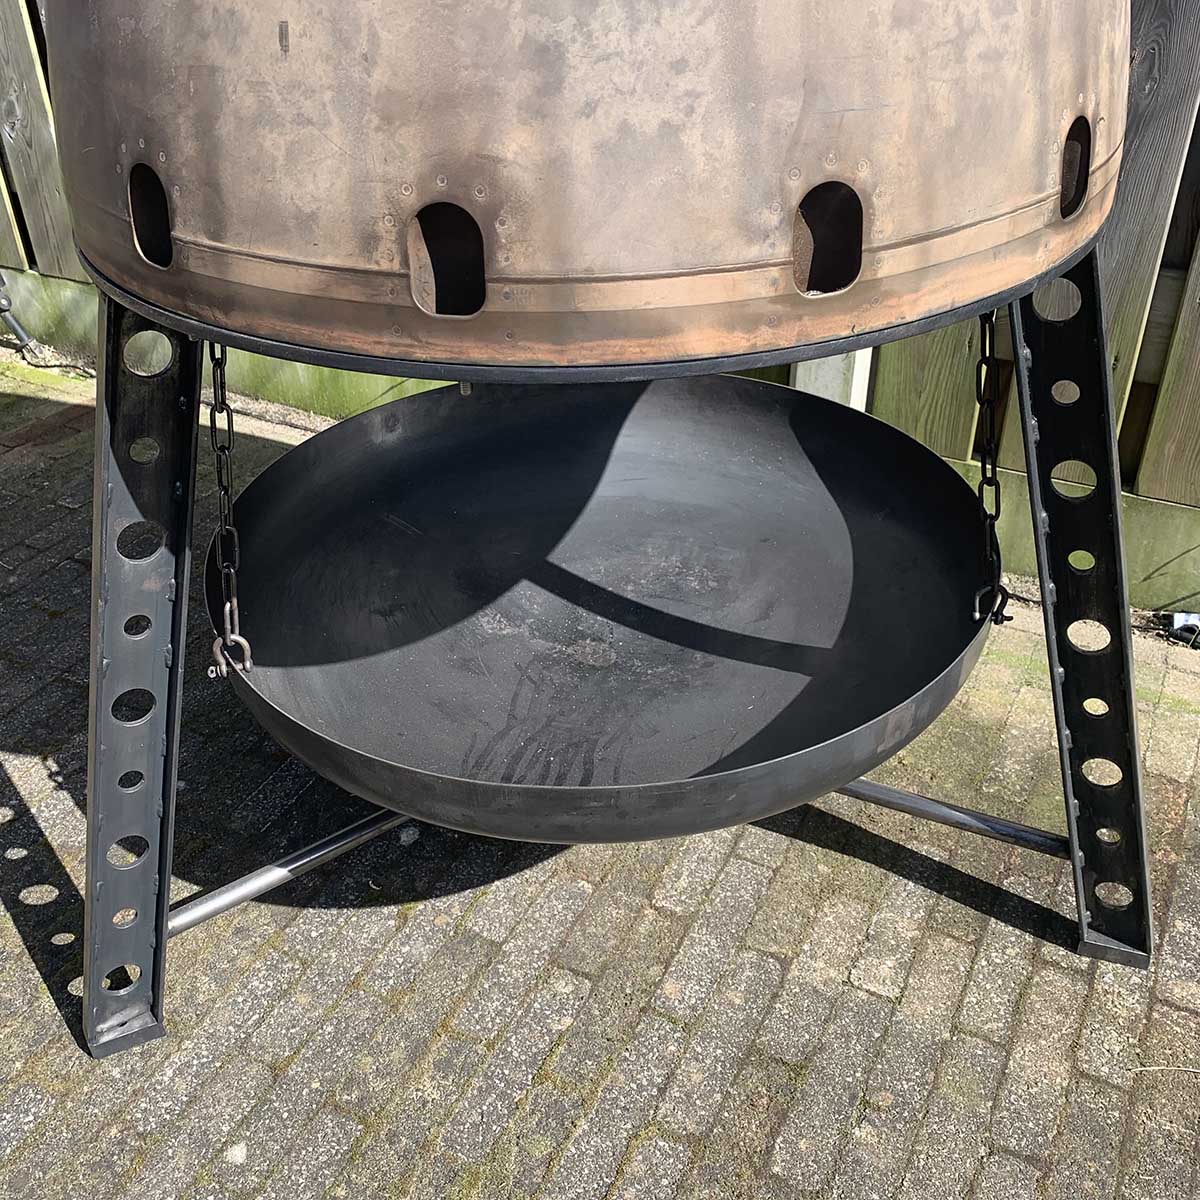 Boeing 747 engine exhaust cone that was used to create an outdoor fireplace.